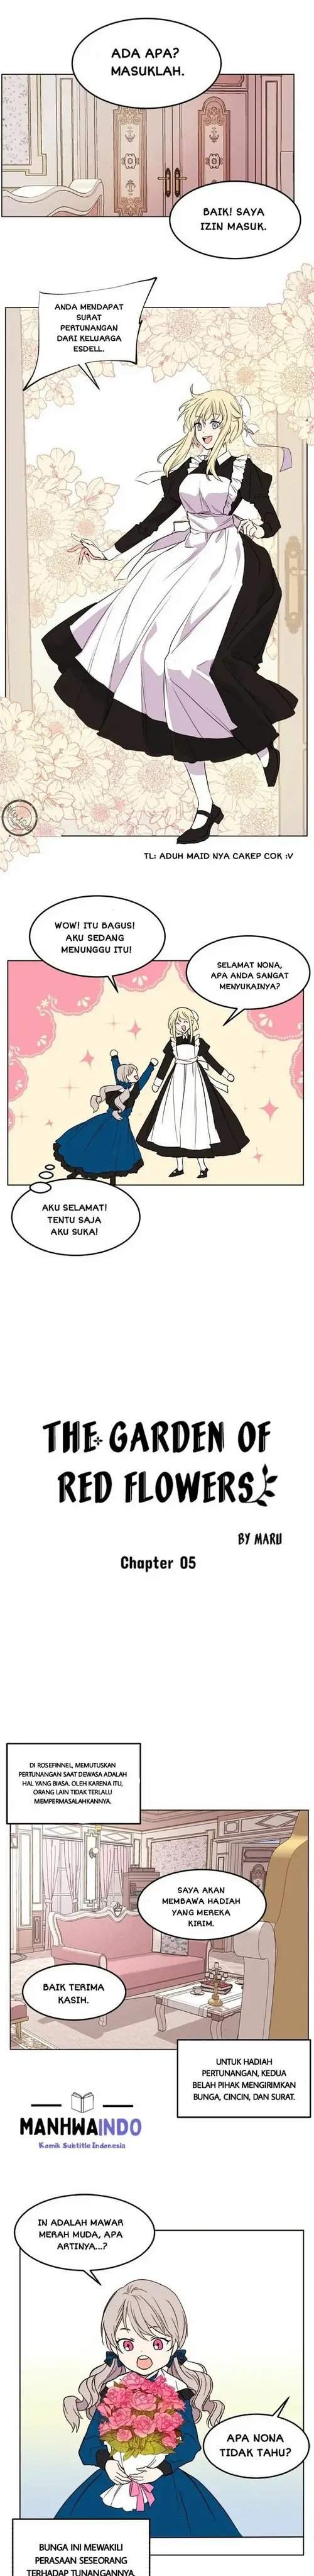 The Garden of Red Flowers Chapter 05